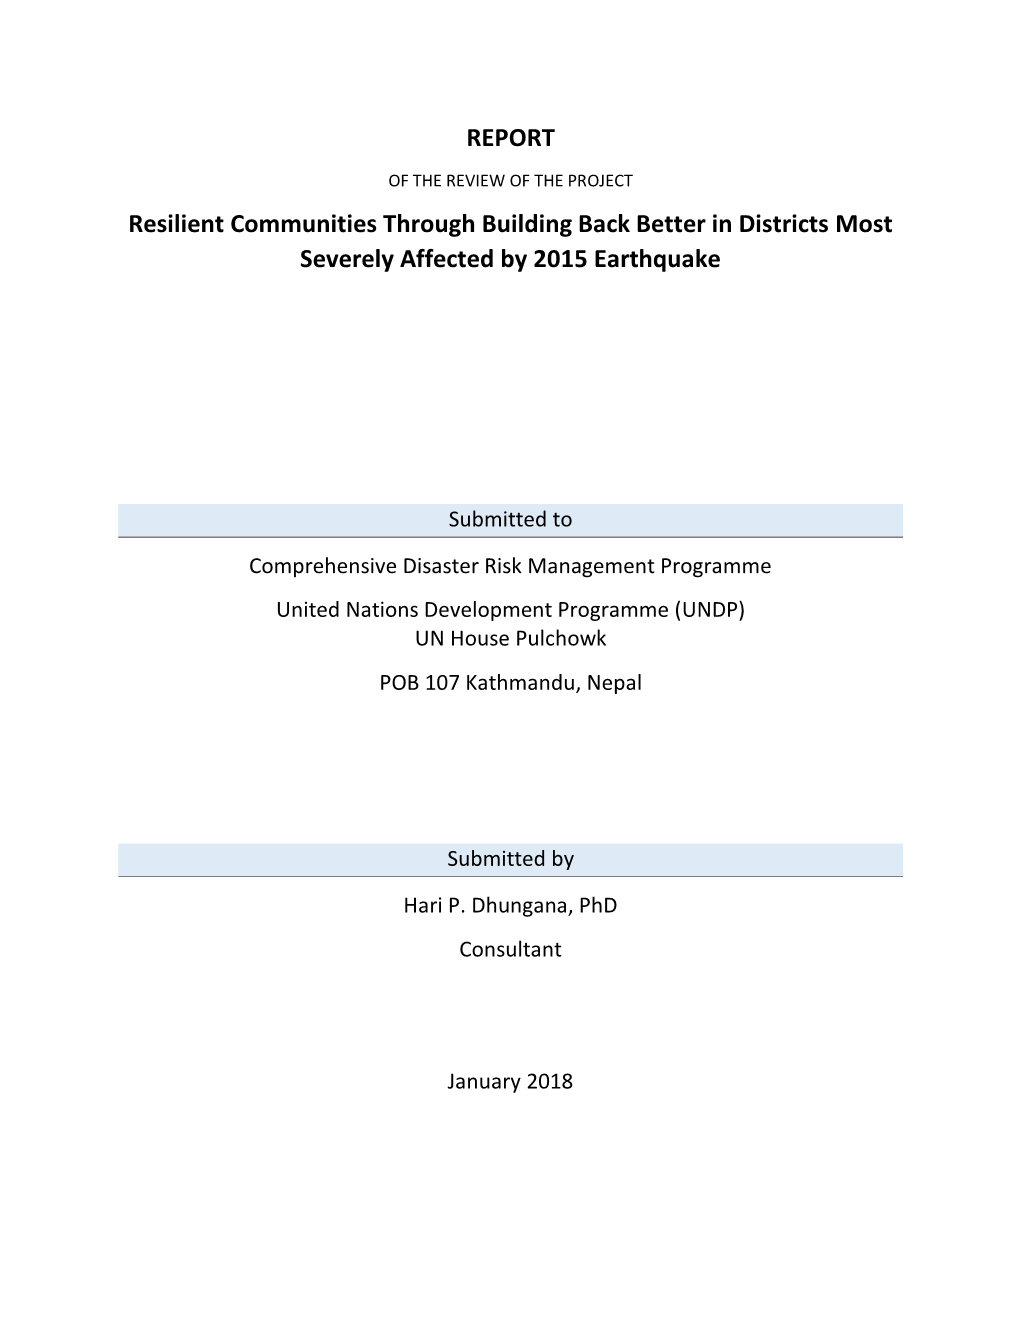 REPORT Resilient Communities Through Building Back Better In